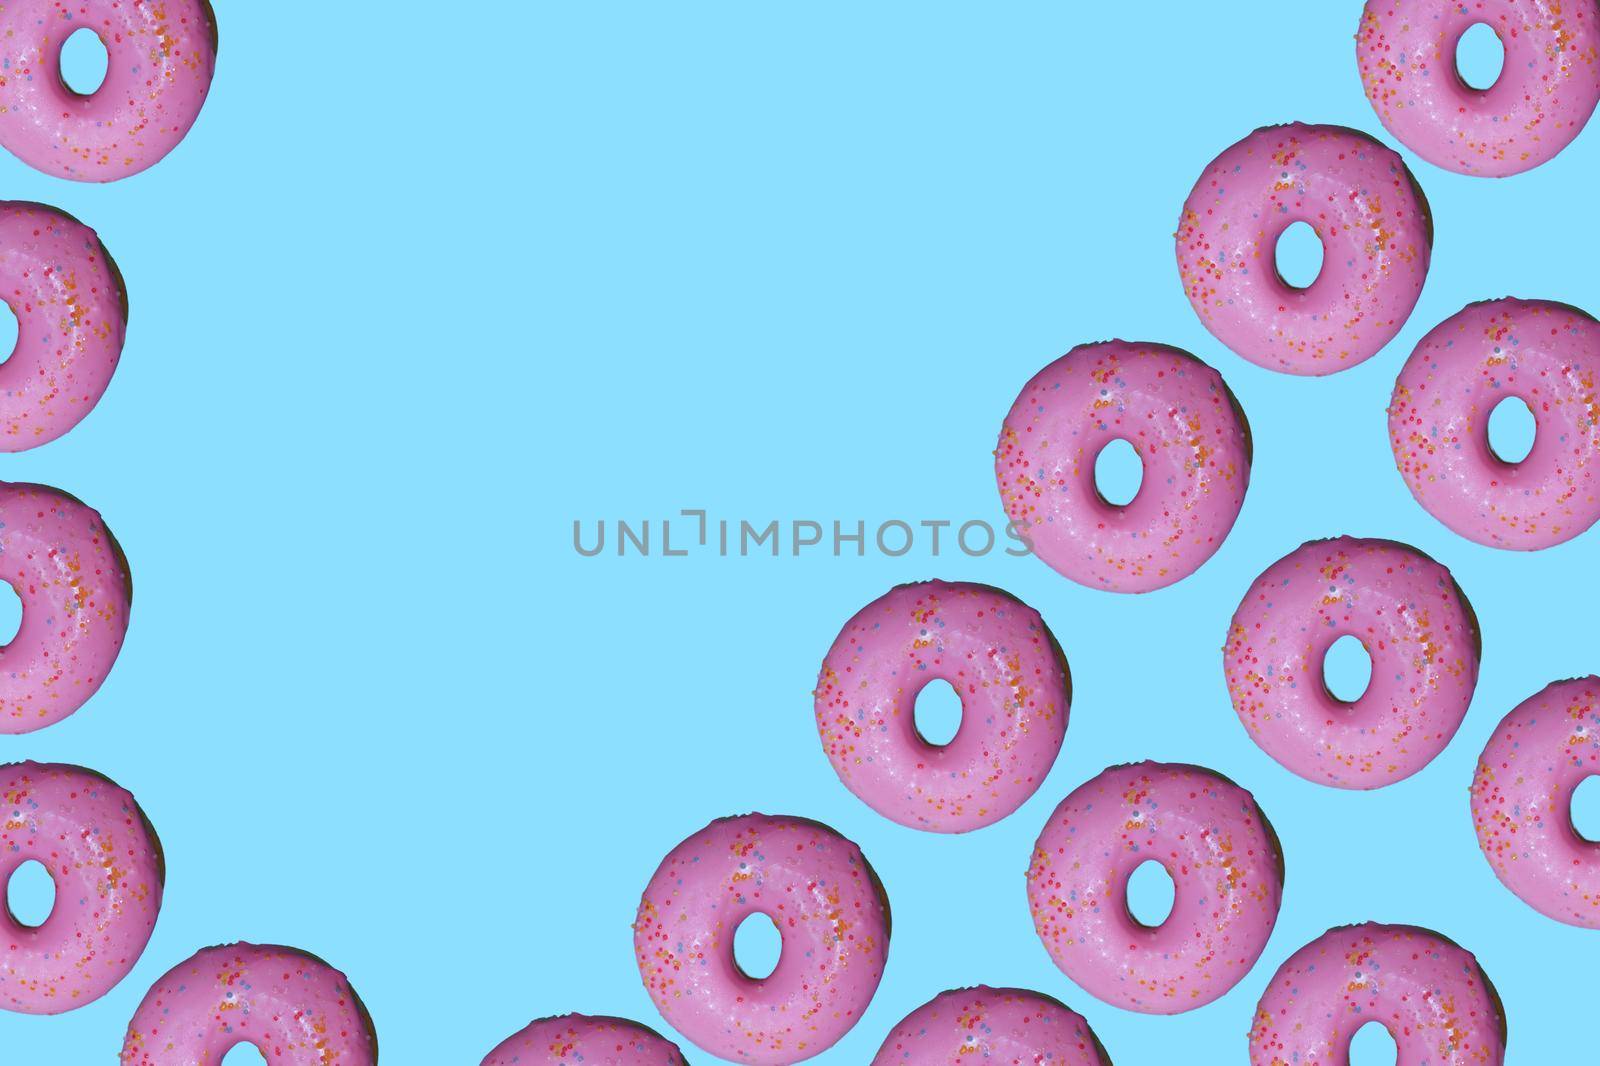 Donut pattern lay flat on top view blue background.